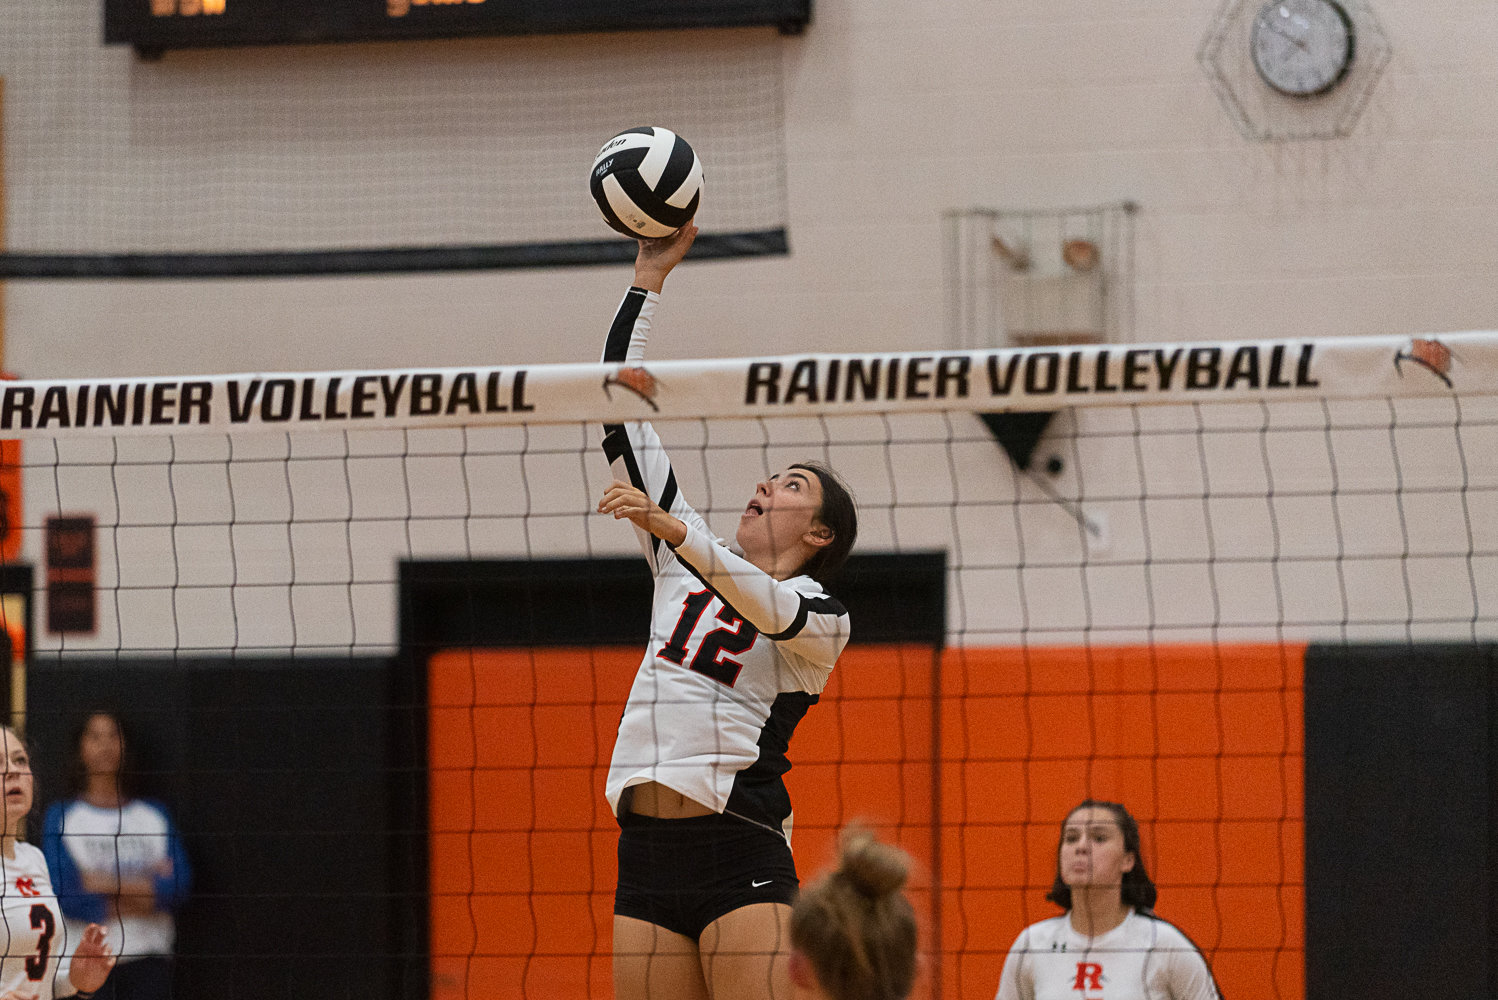 Acacia Murphy loops a tip over the net during Rainier's loss to Toutle Lake on Sept. 29.